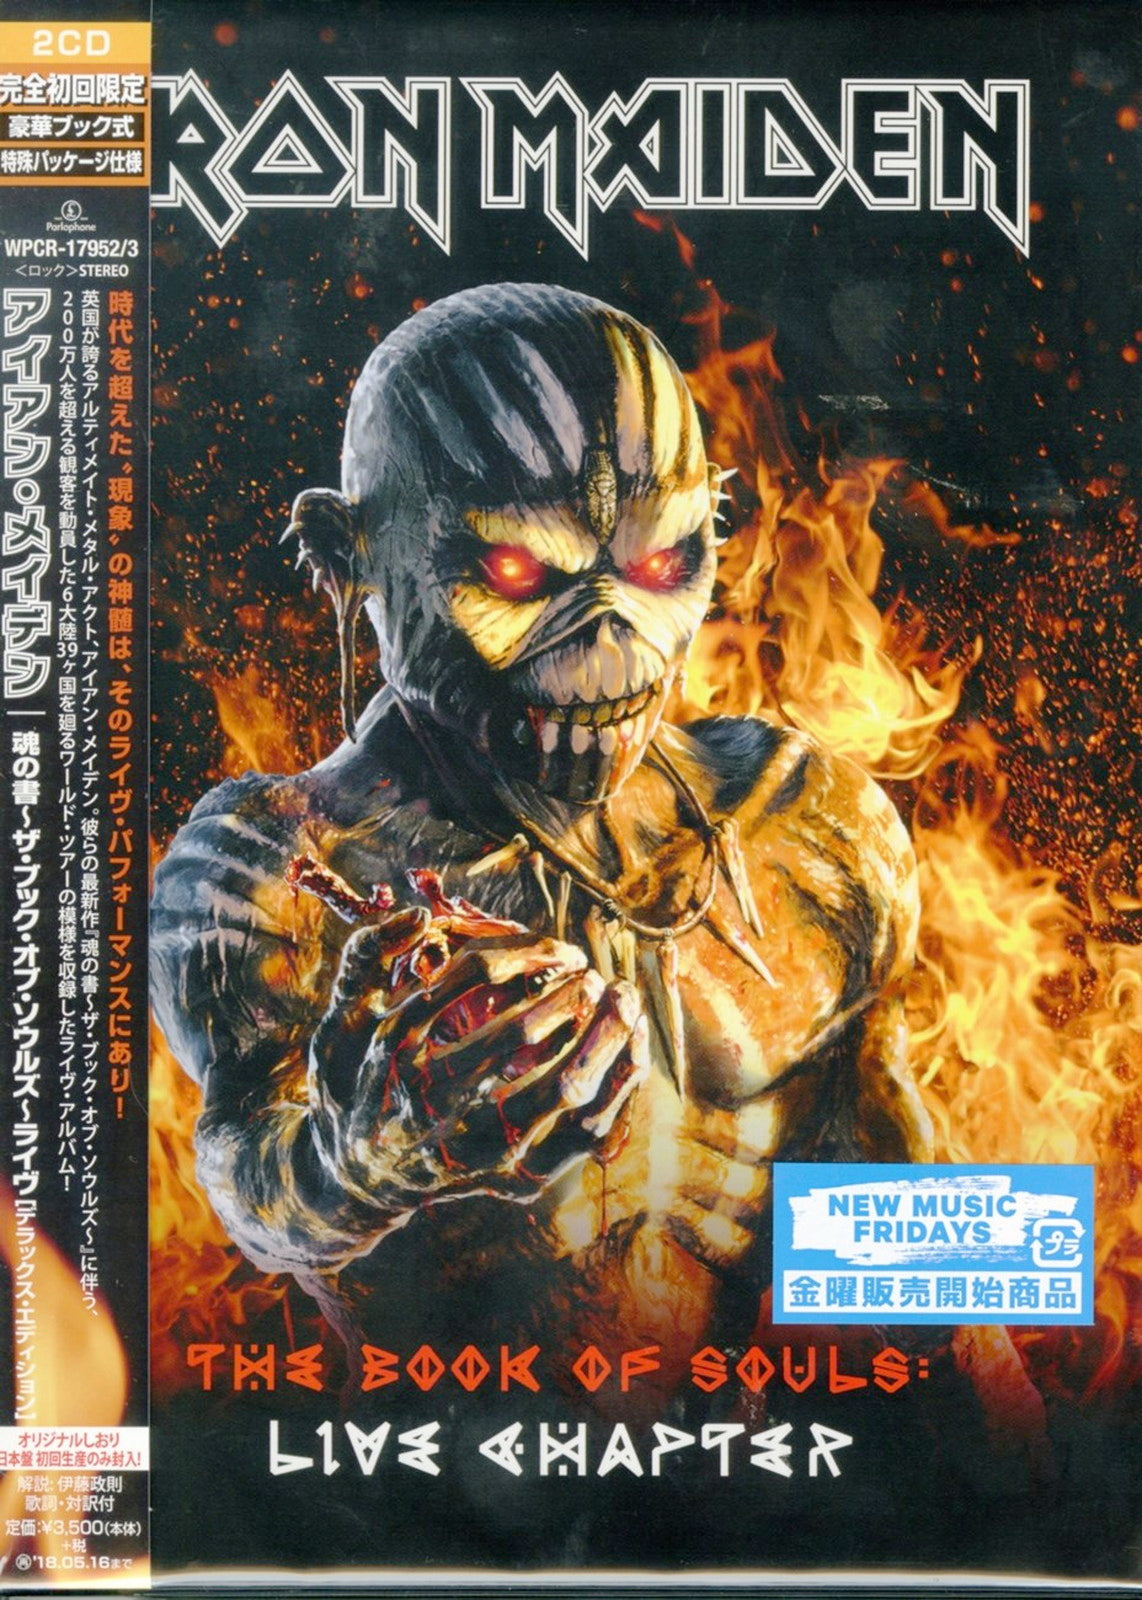 Iron Maiden - The Book Of Souls - Japan  2 CD+Book Limited Edition